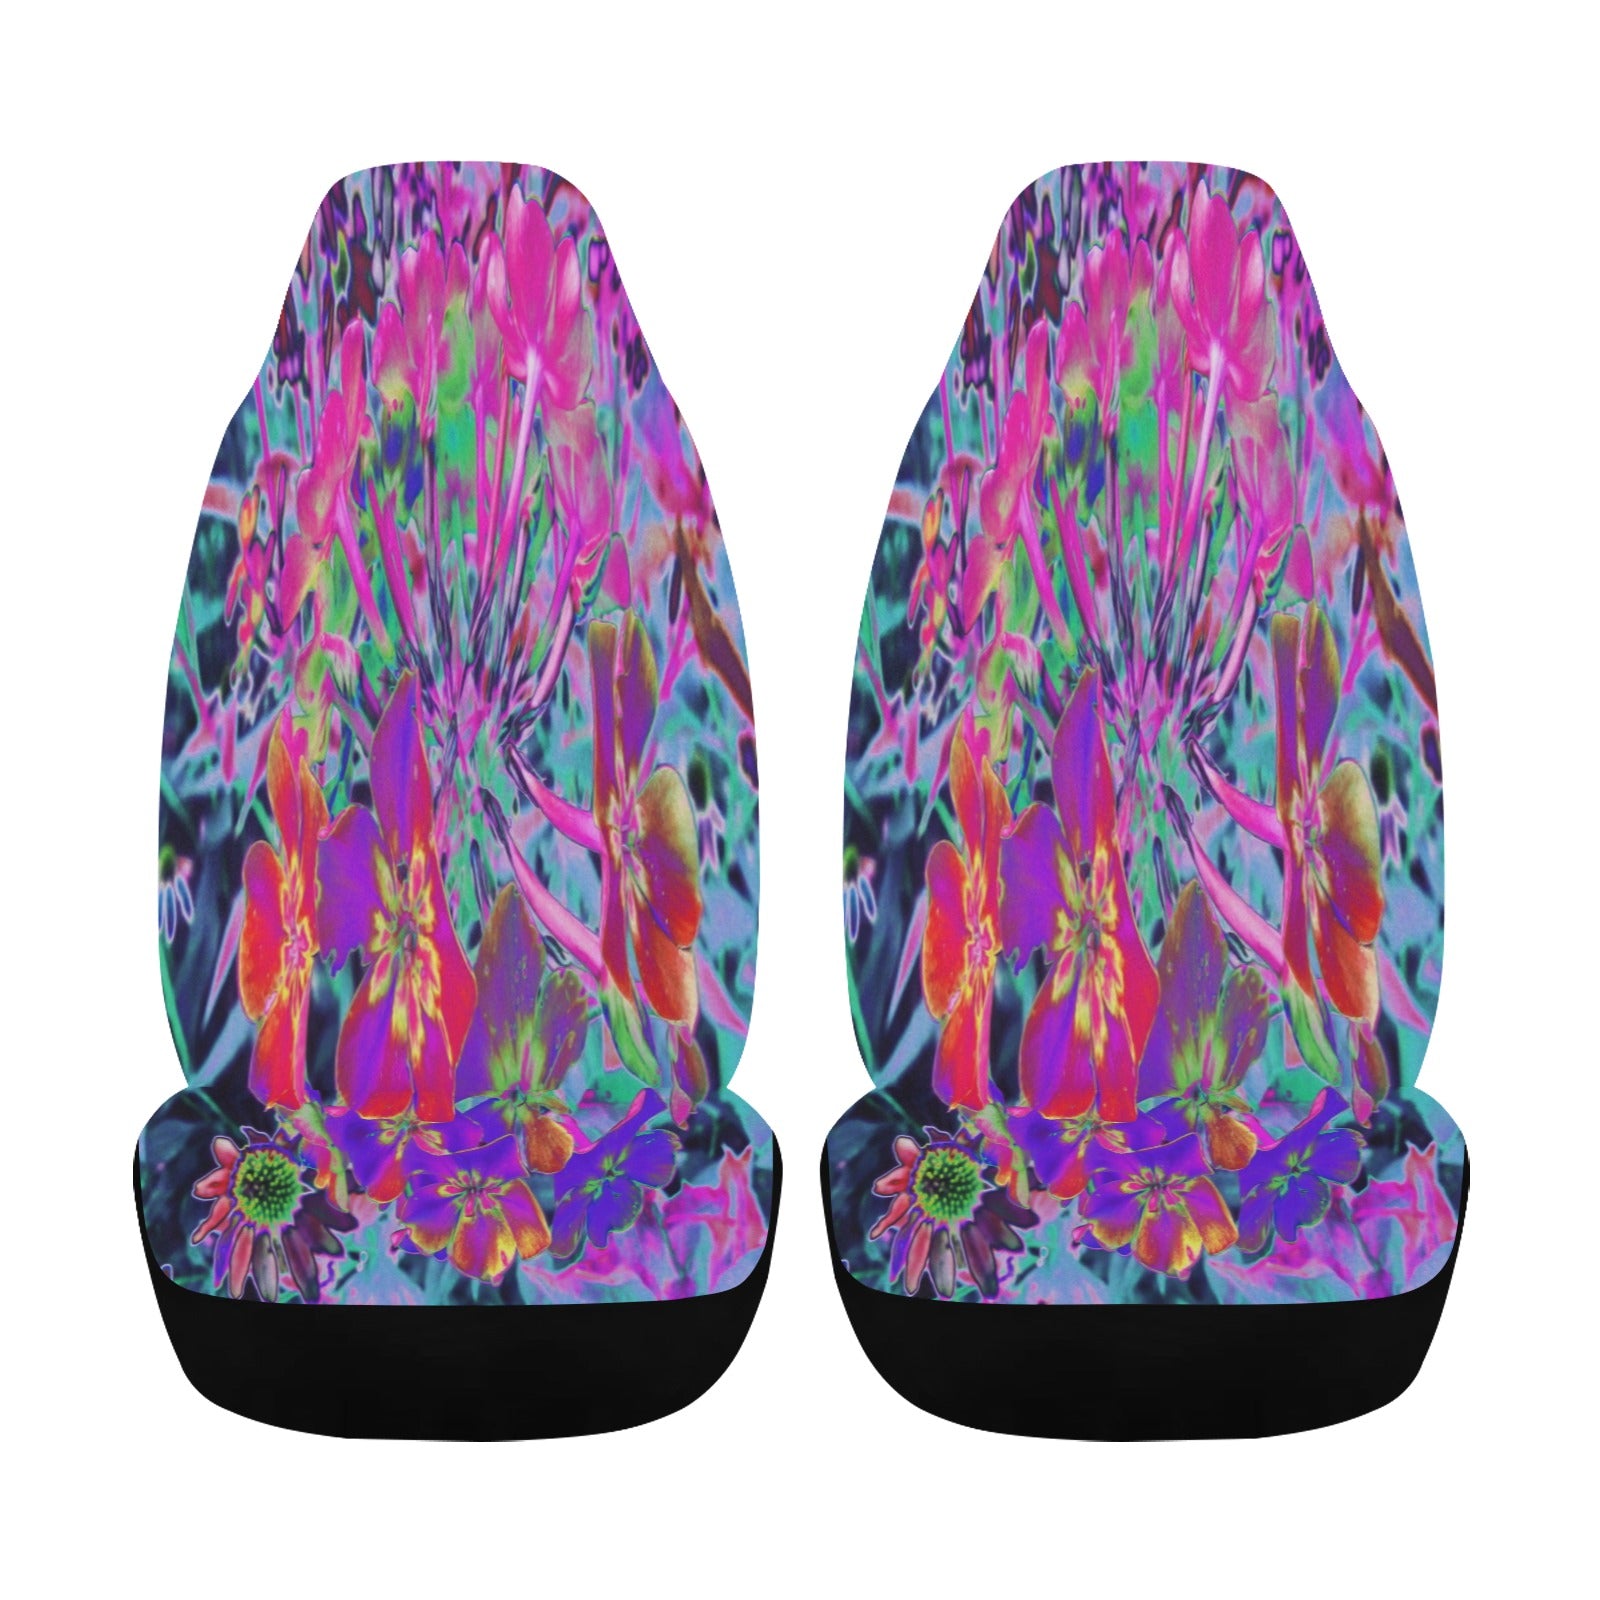 Car Seat Covers, Dramatic Psychedelic Colorful Red and Purple Flowers